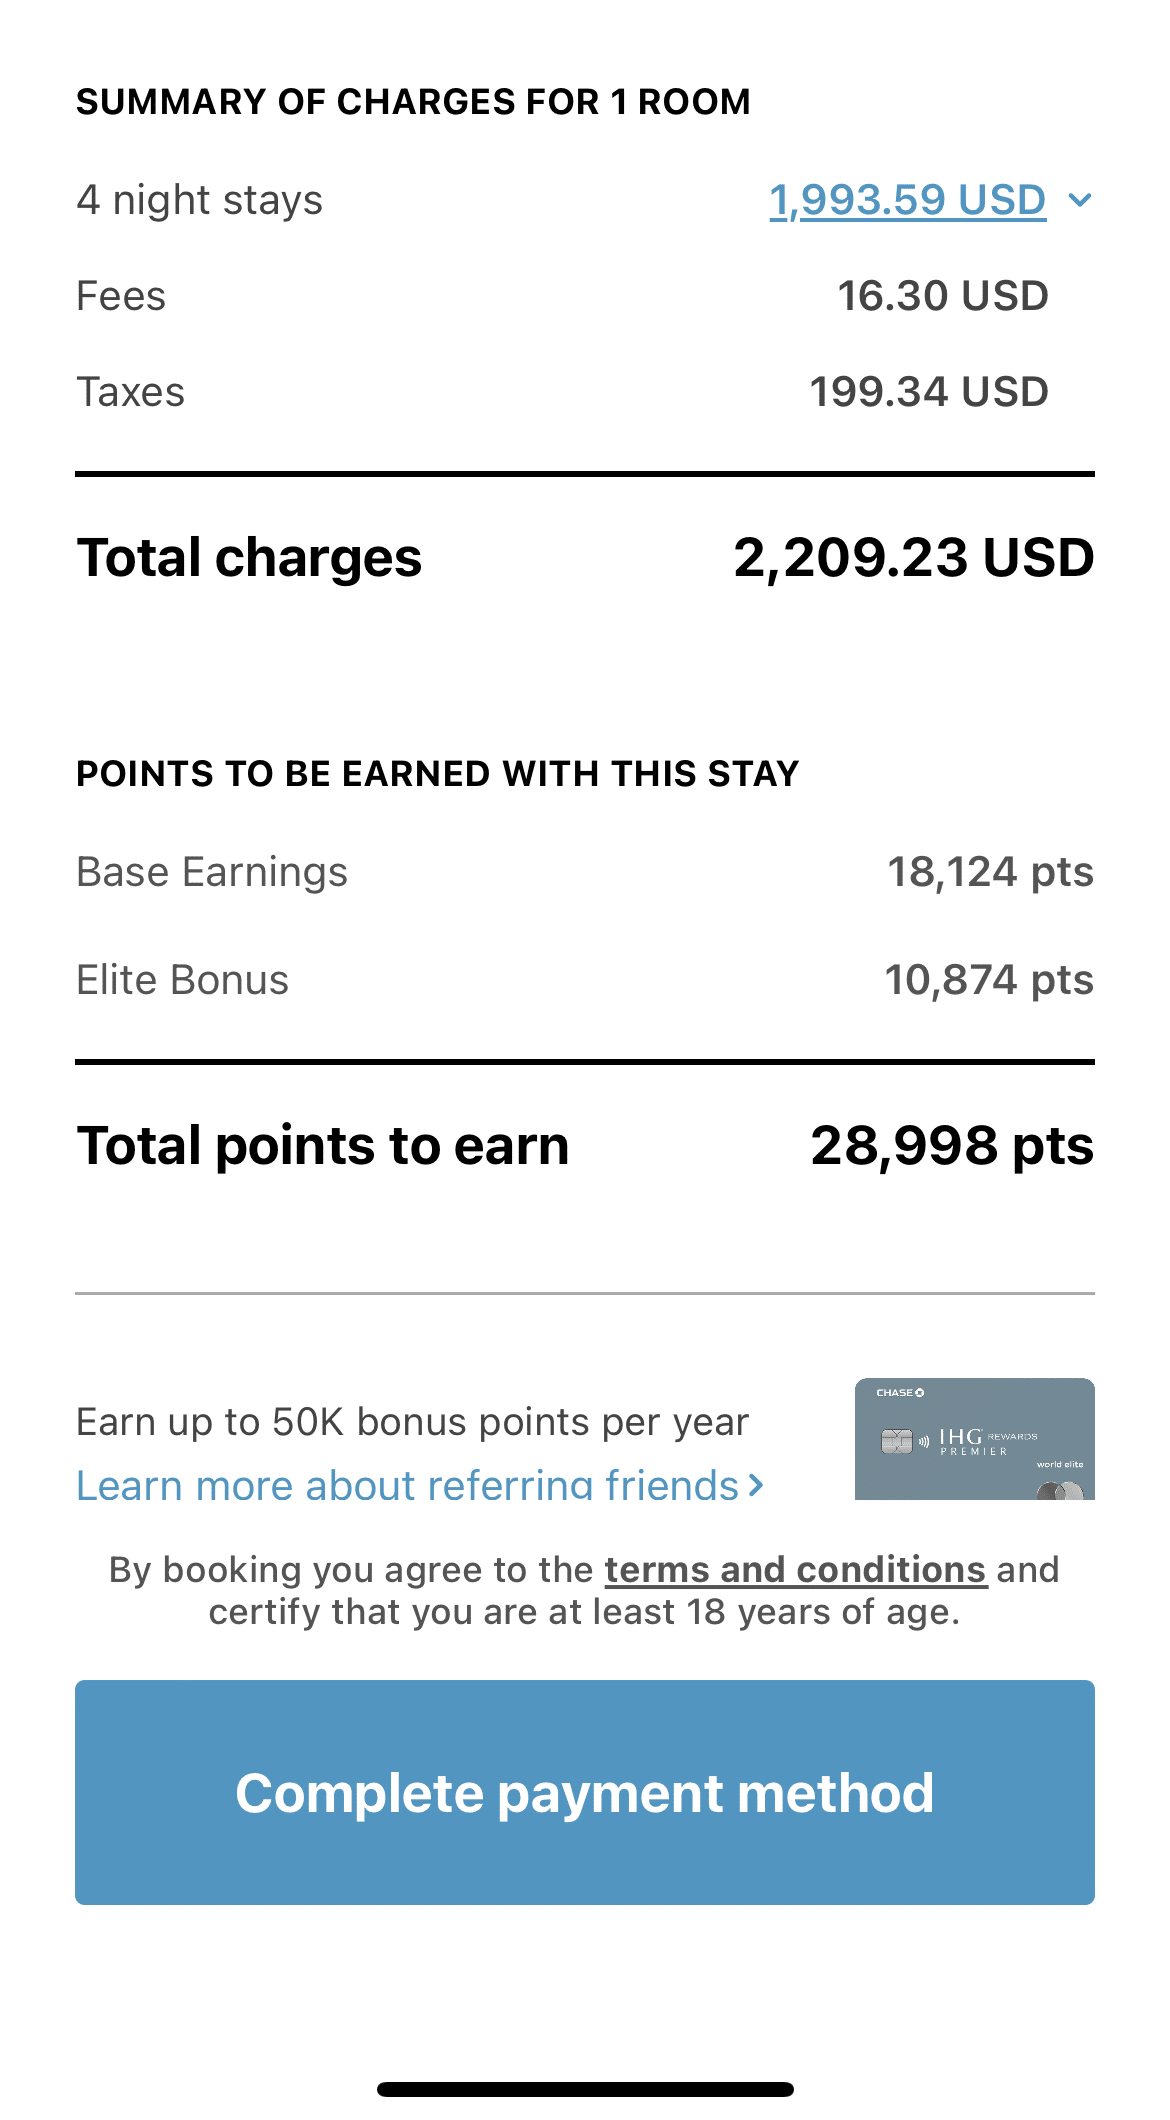 Buying Hotel Points to Save Money